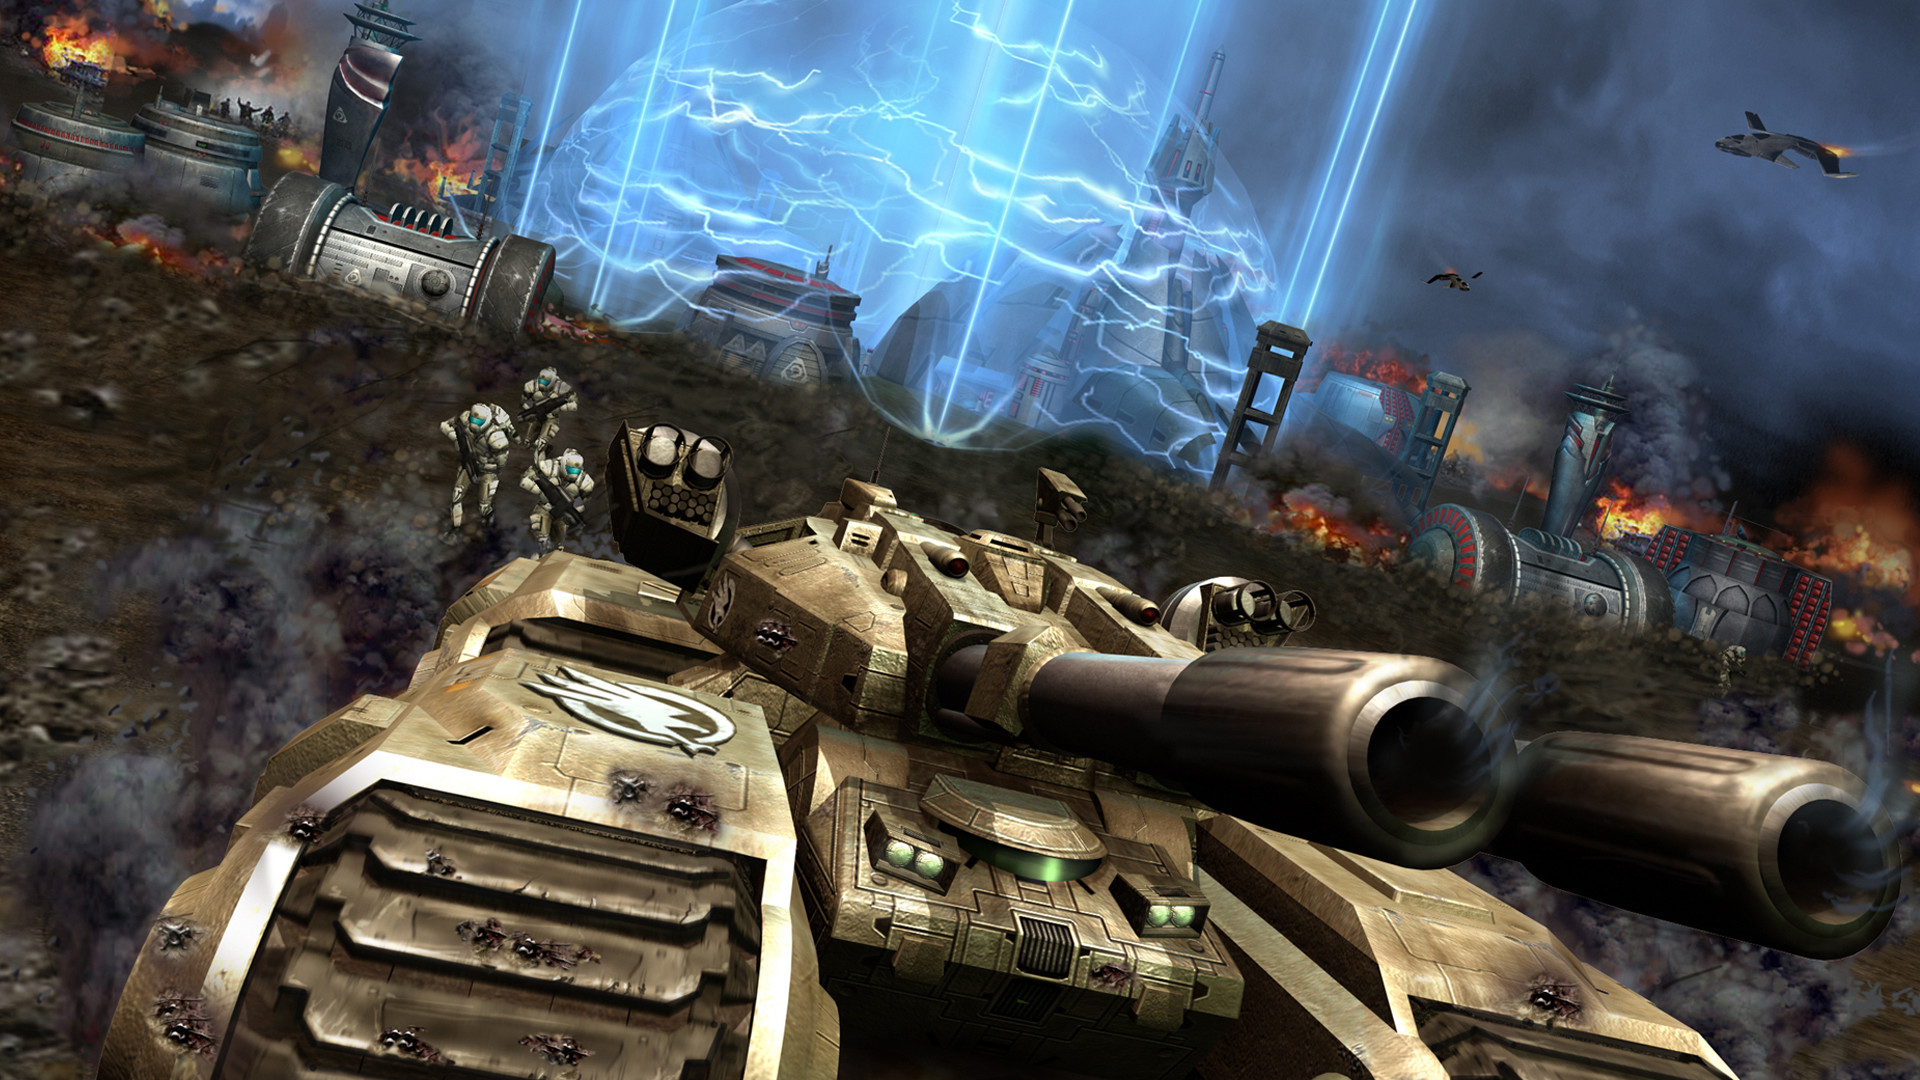 1920x1080 Video Game - Command & Conquer Wallpaper